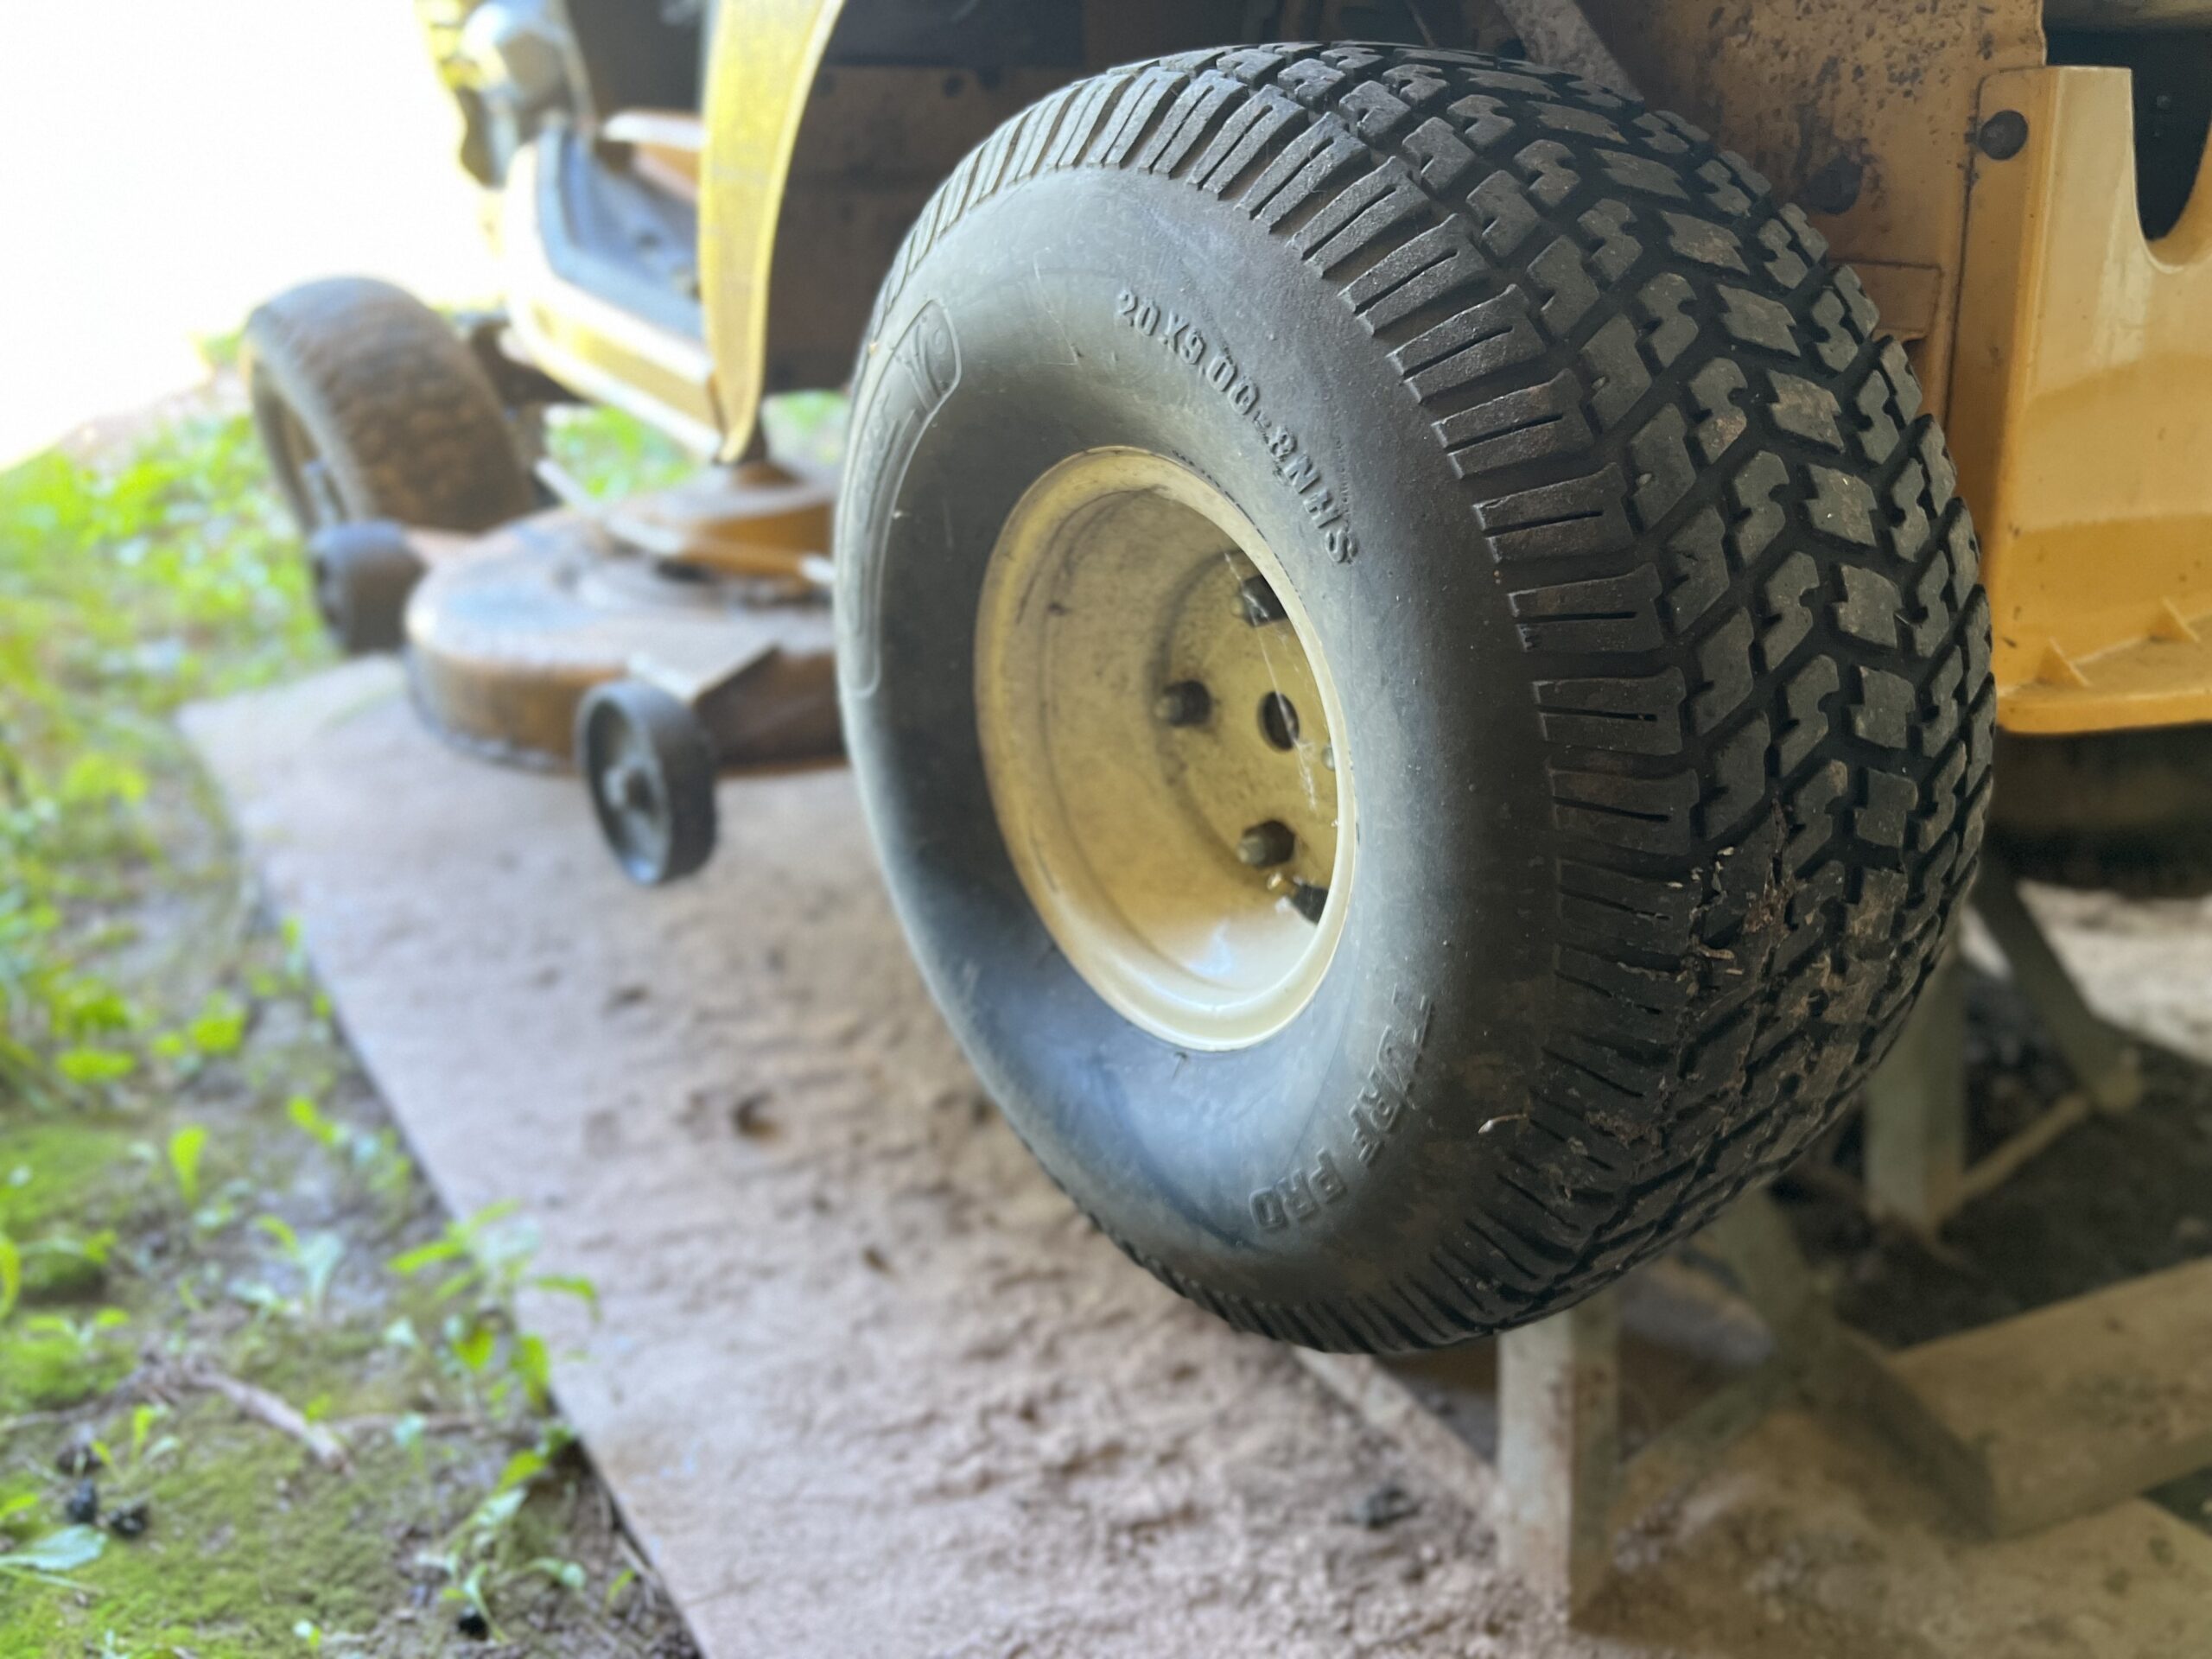 how to remove lawn mower tire from rim